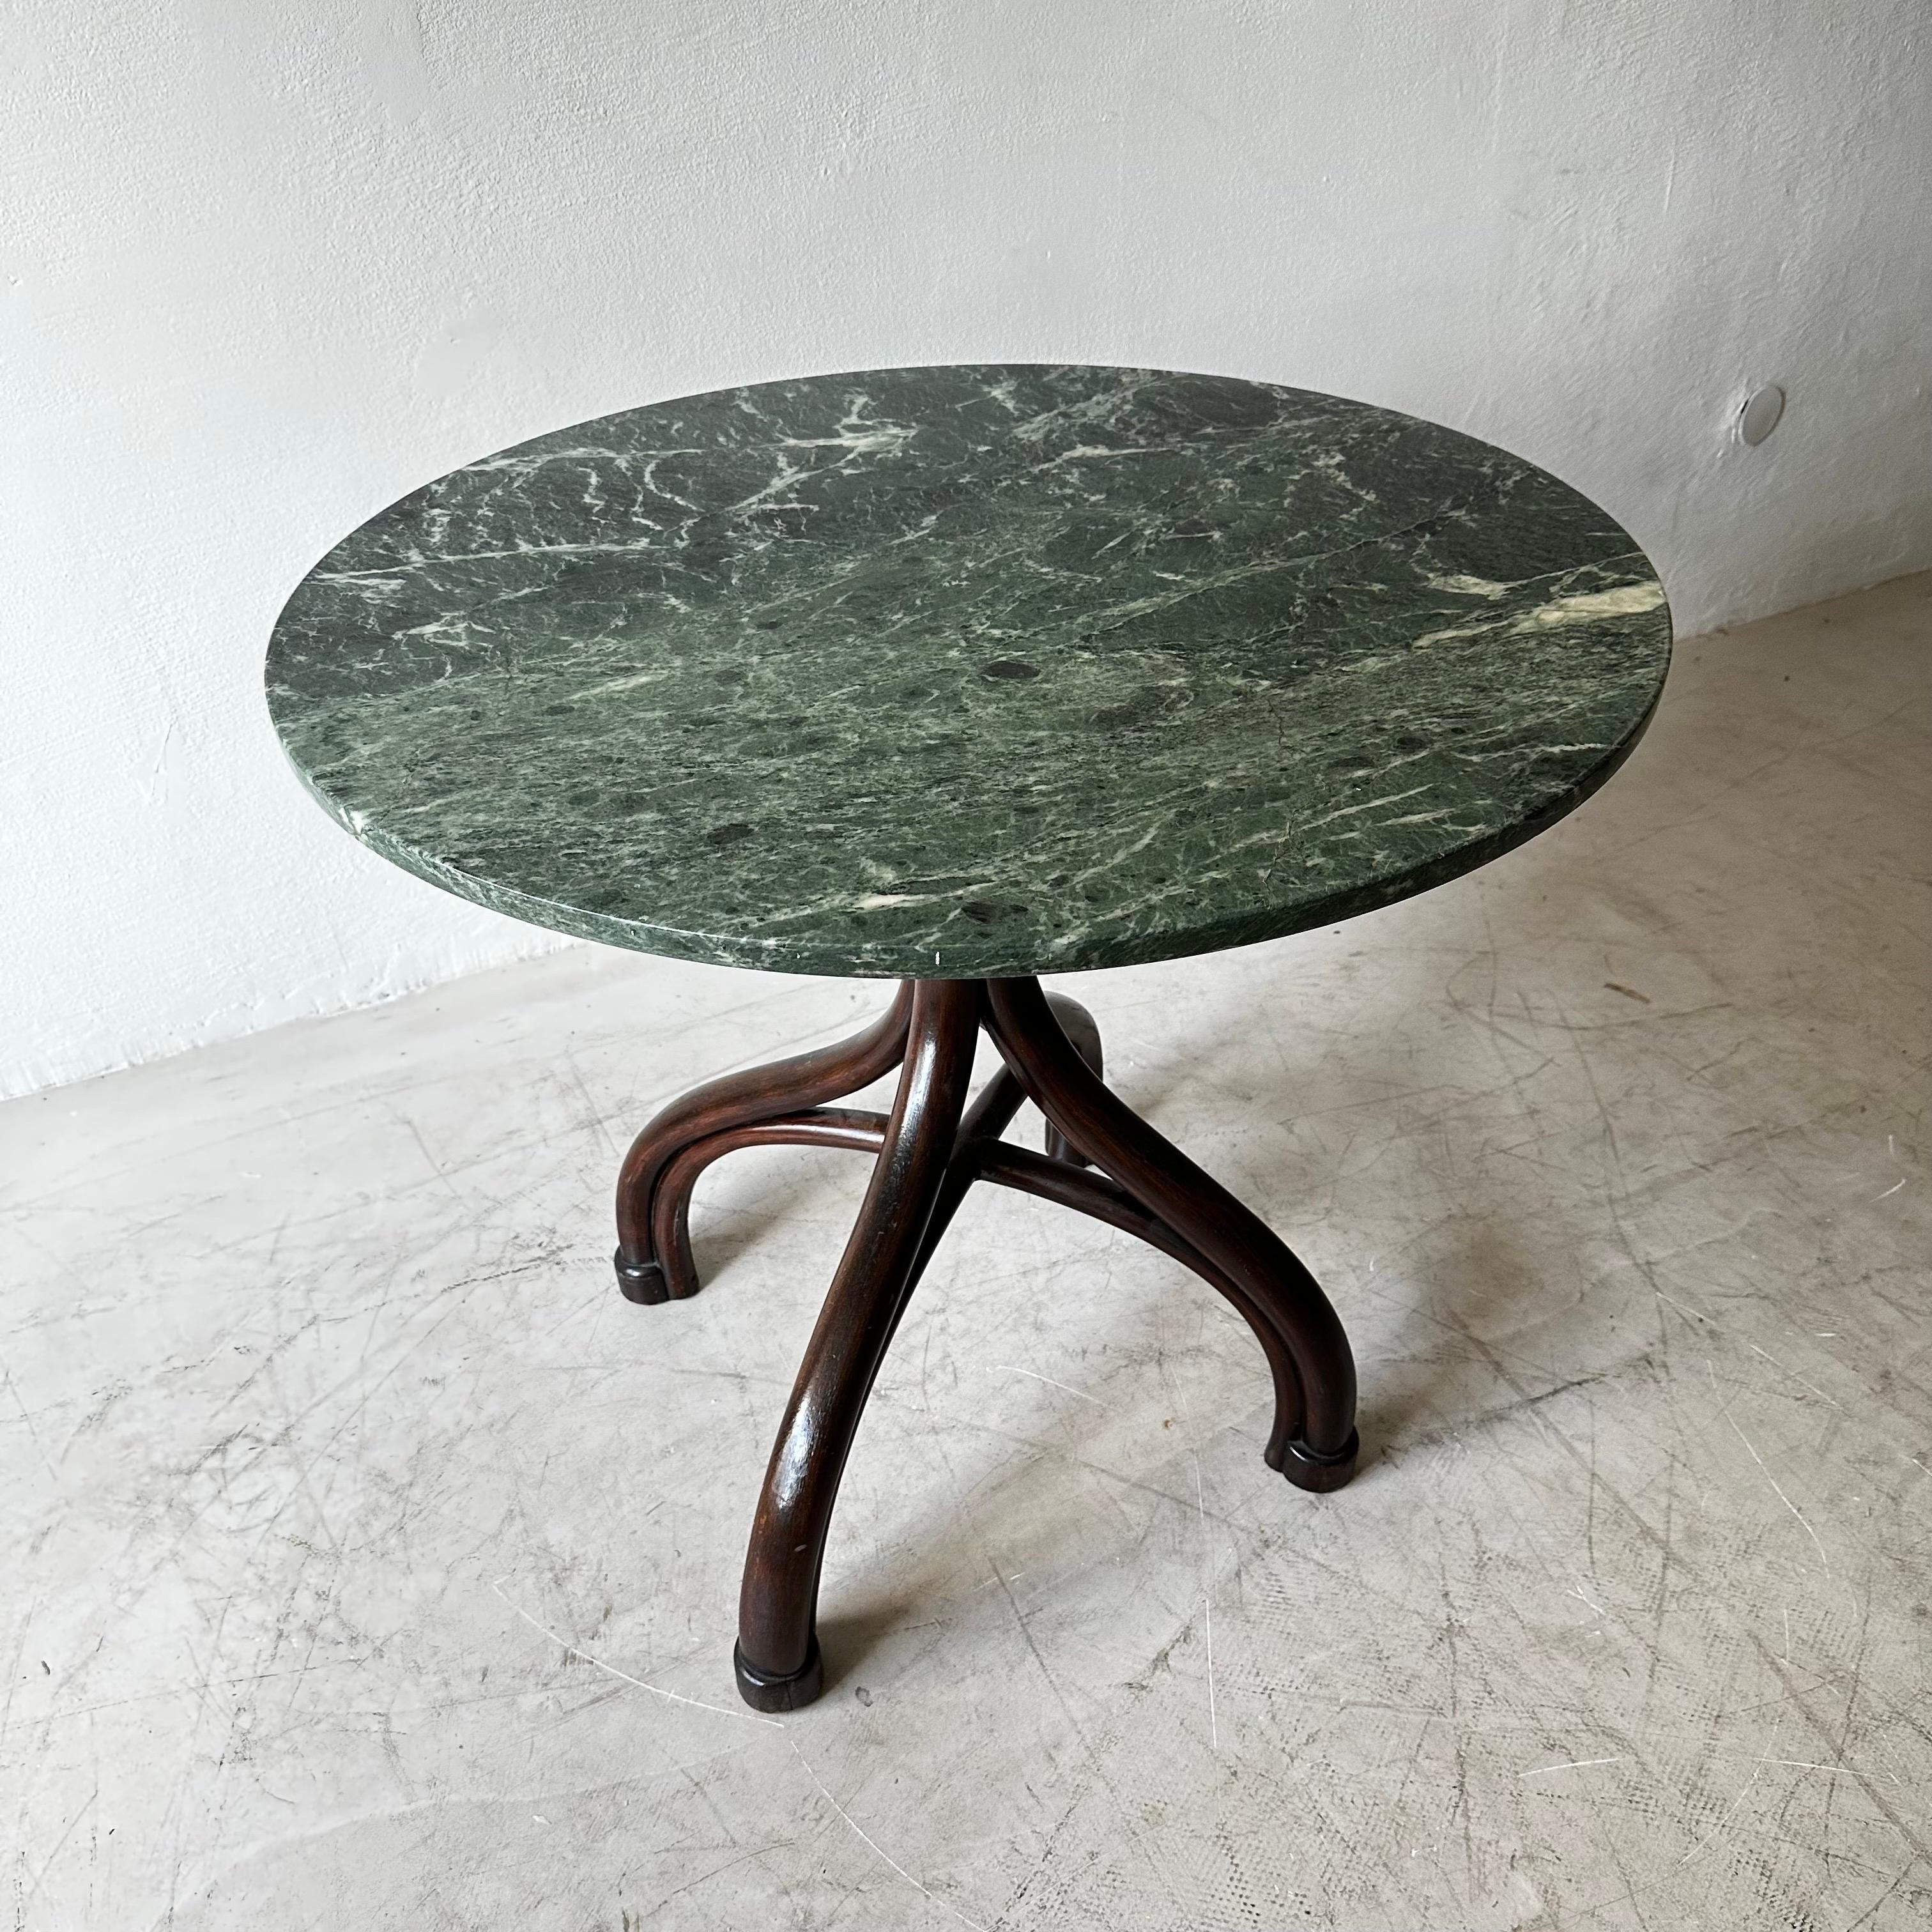 Adolf Loos Cafe Museum Center Hall Table with Green Marble Top, Austria 1910 For Sale 7